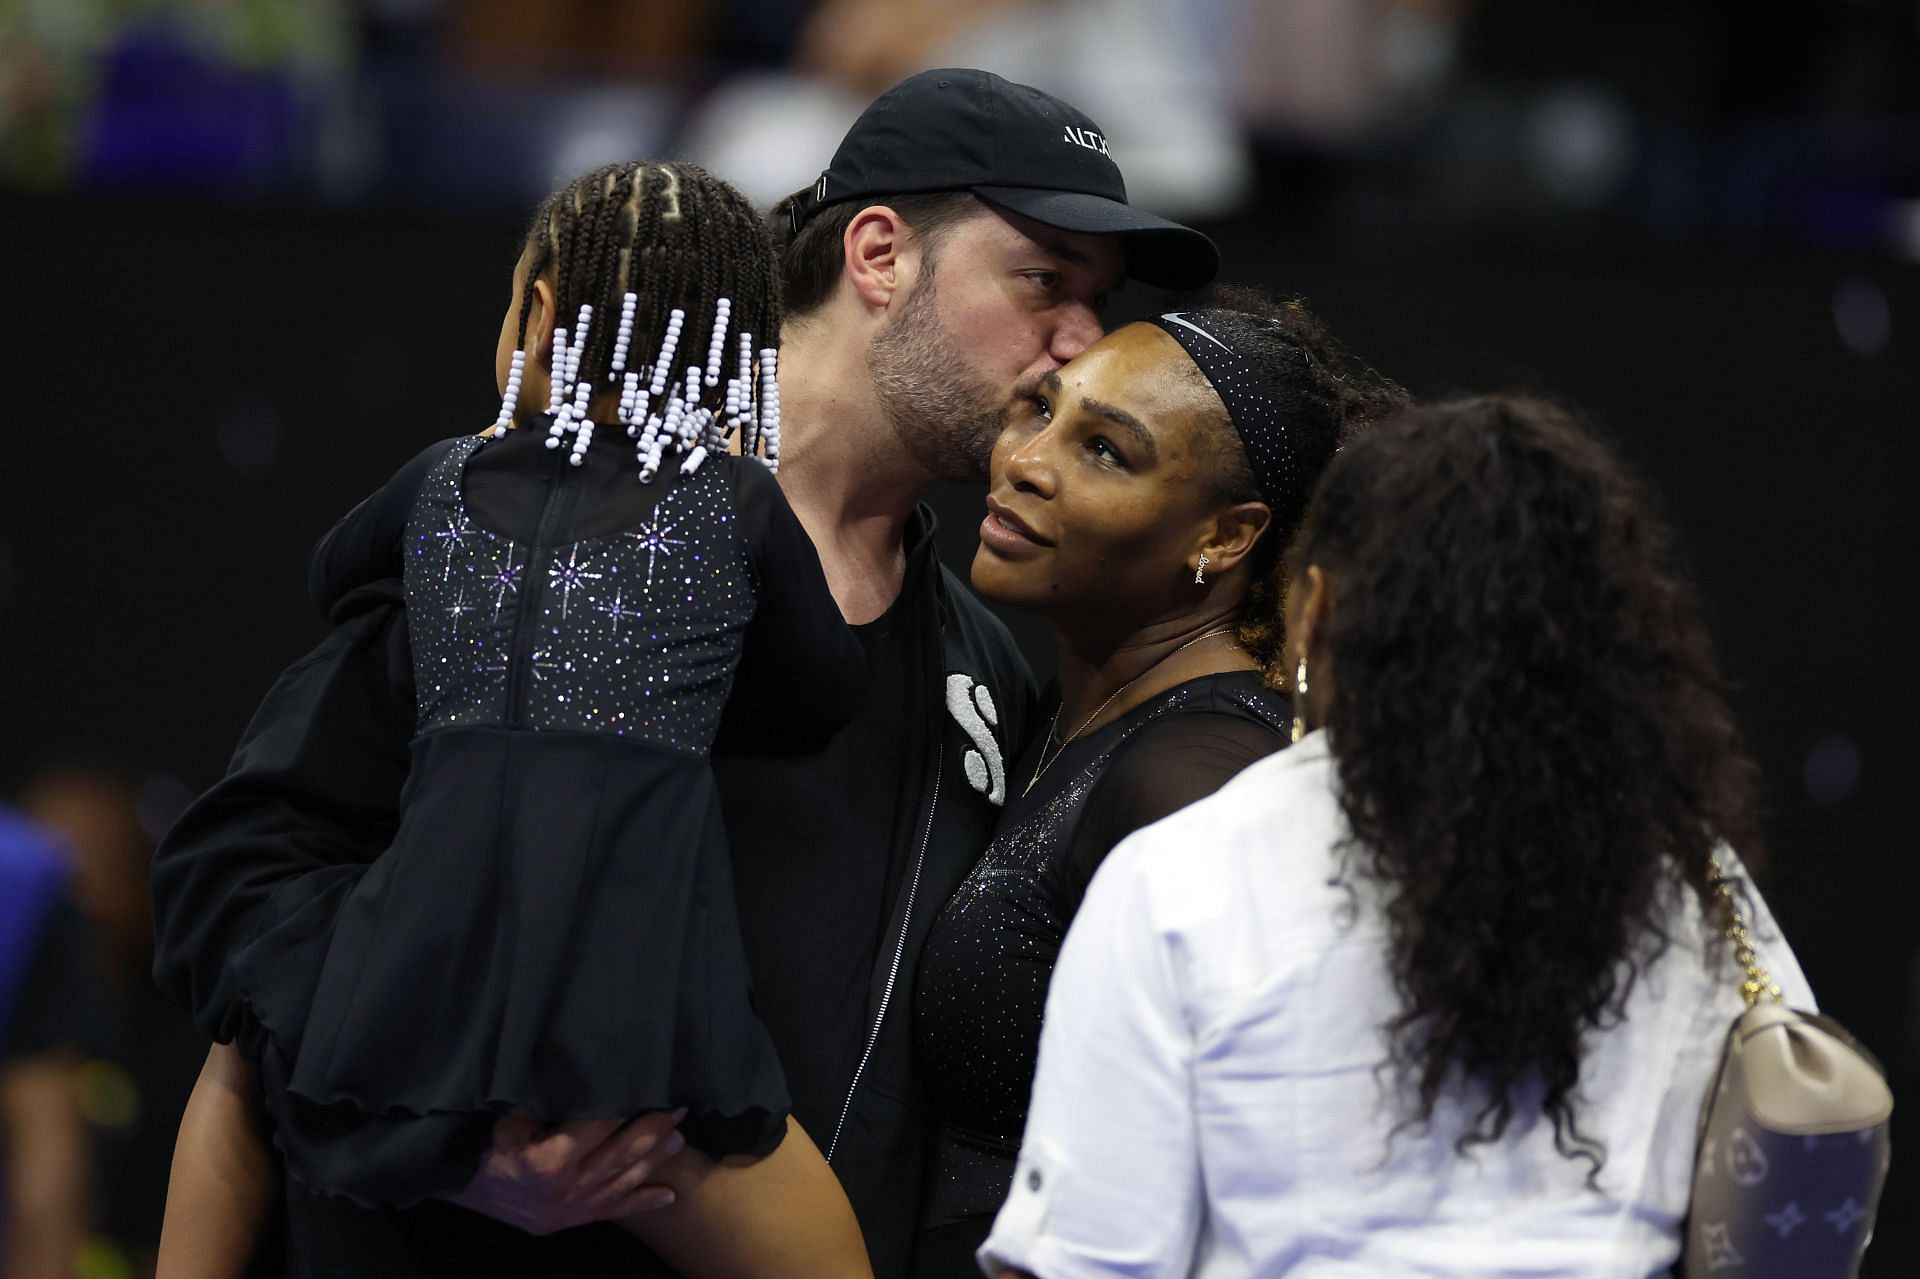 Williams and her husband Alexis Ohanian at the 2022 US Open